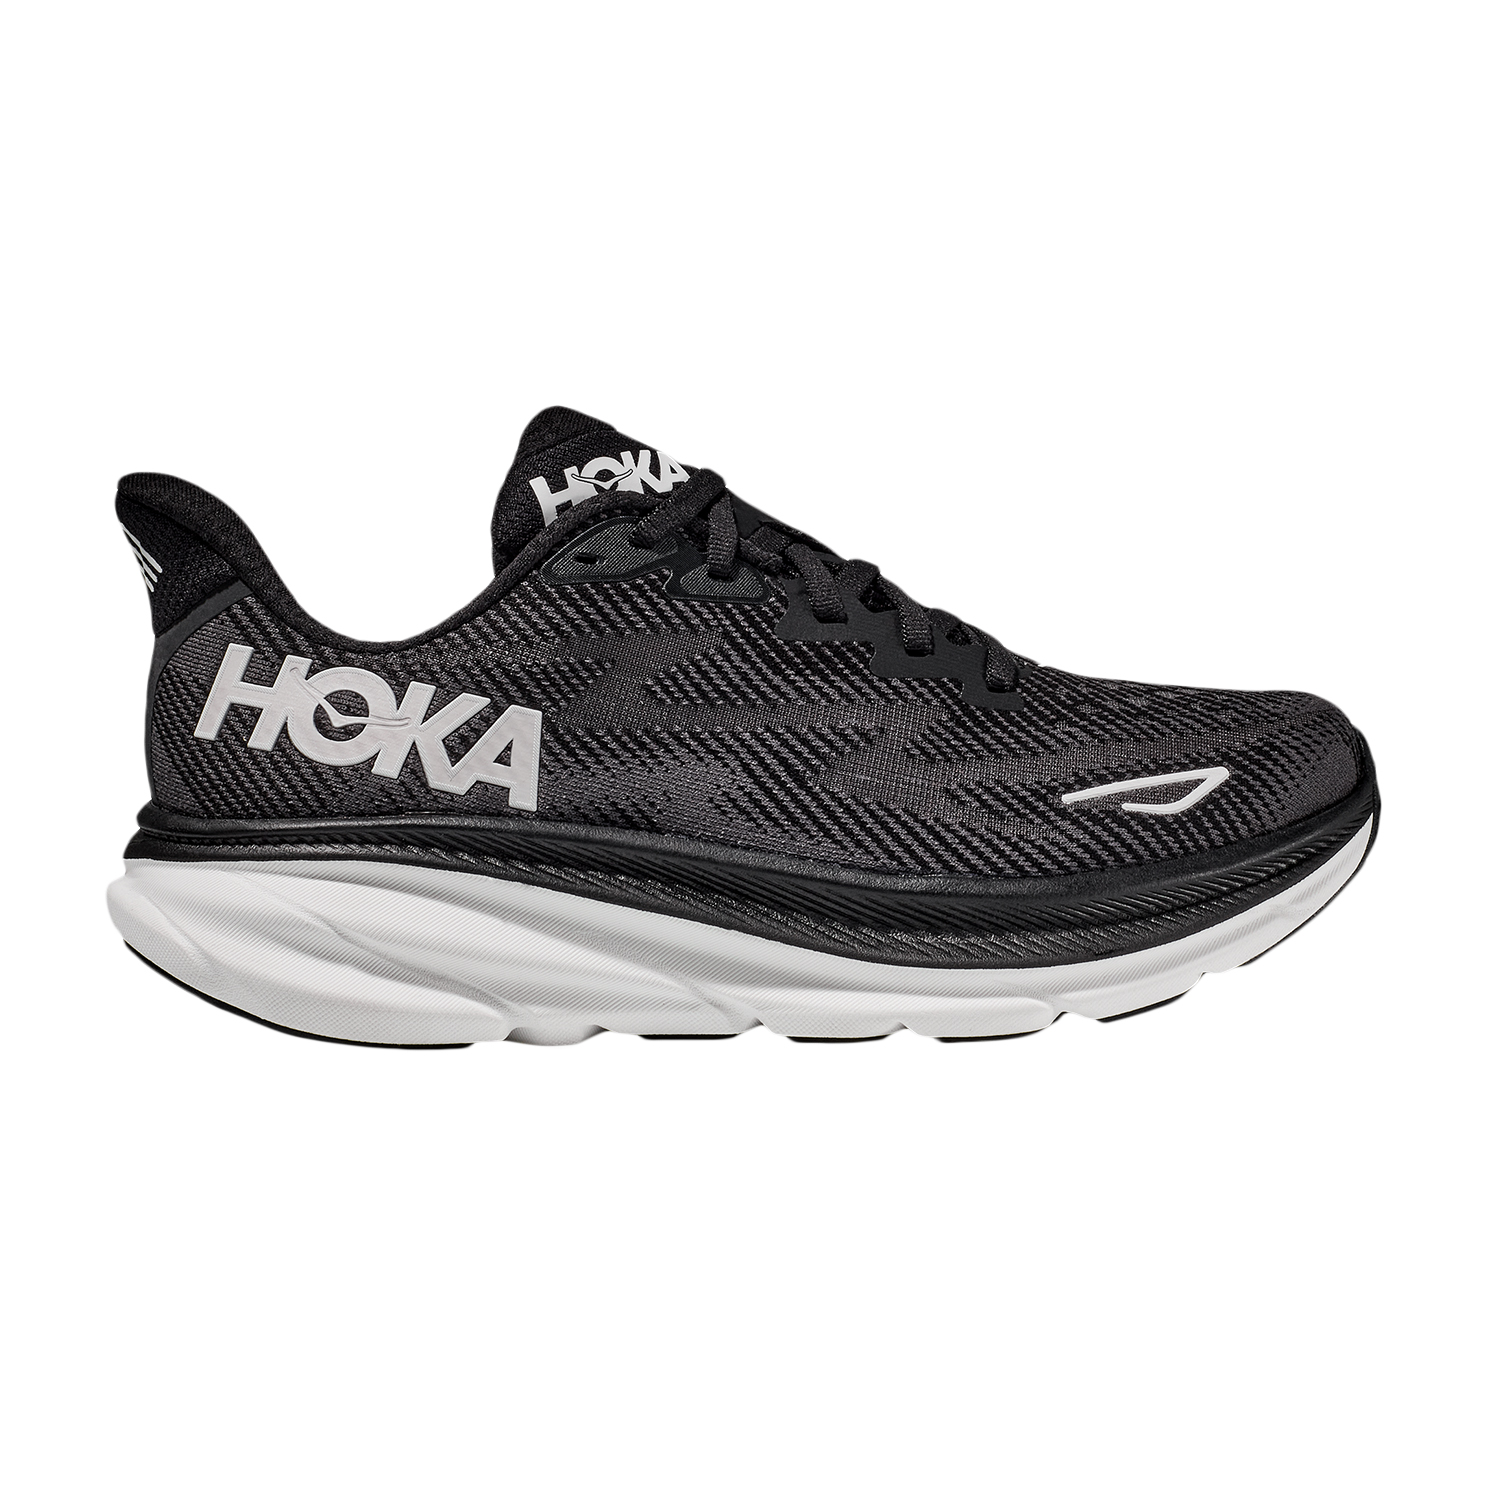 Hoka One One Clifton 9 Wide Men's Running Shoes - Black/White